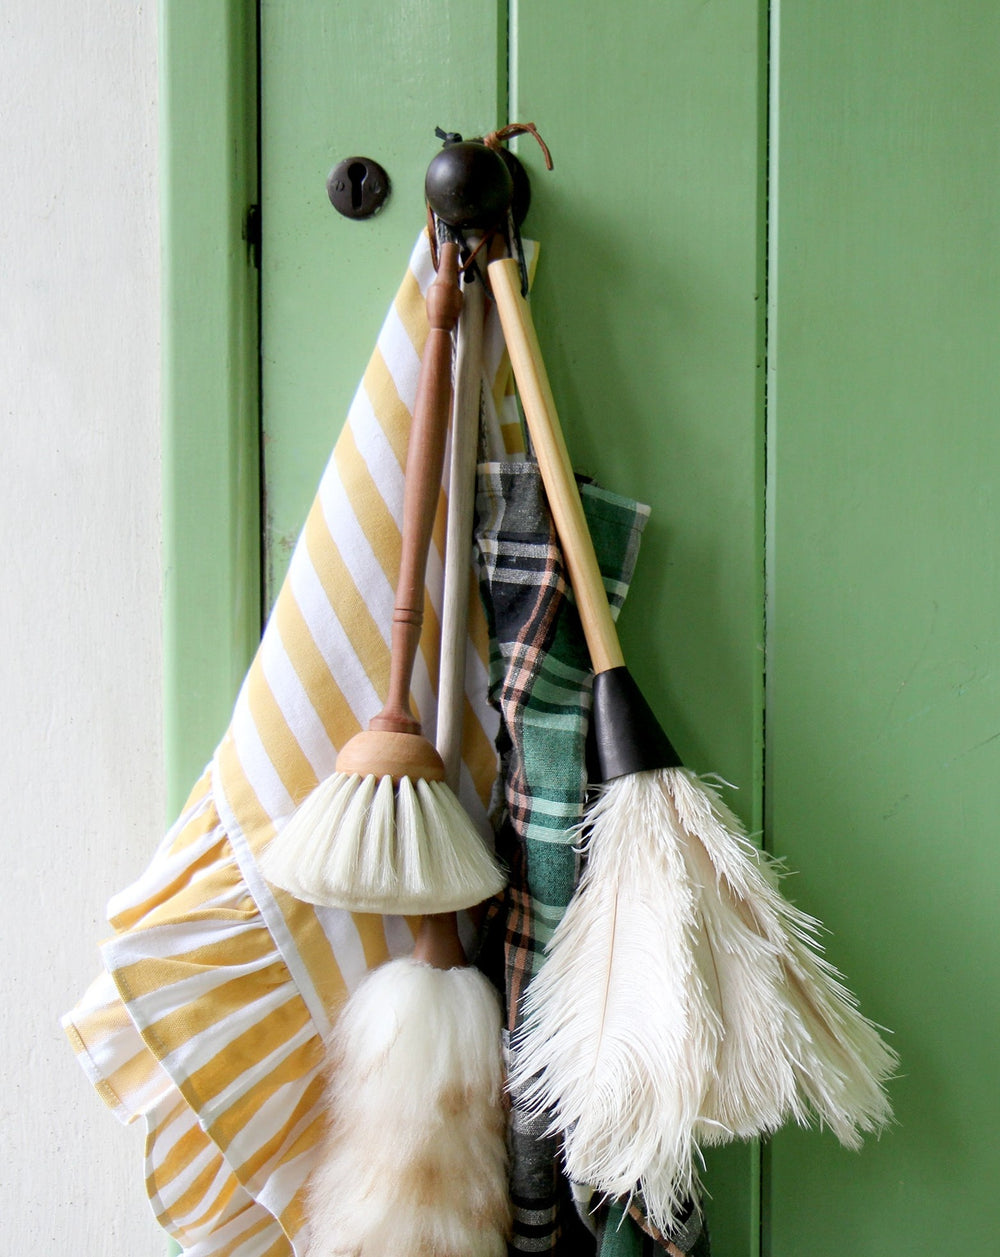 short ostrich feather duster with wooden handle and cream feathers, pictured against green pantry door with other brushes and t-towels